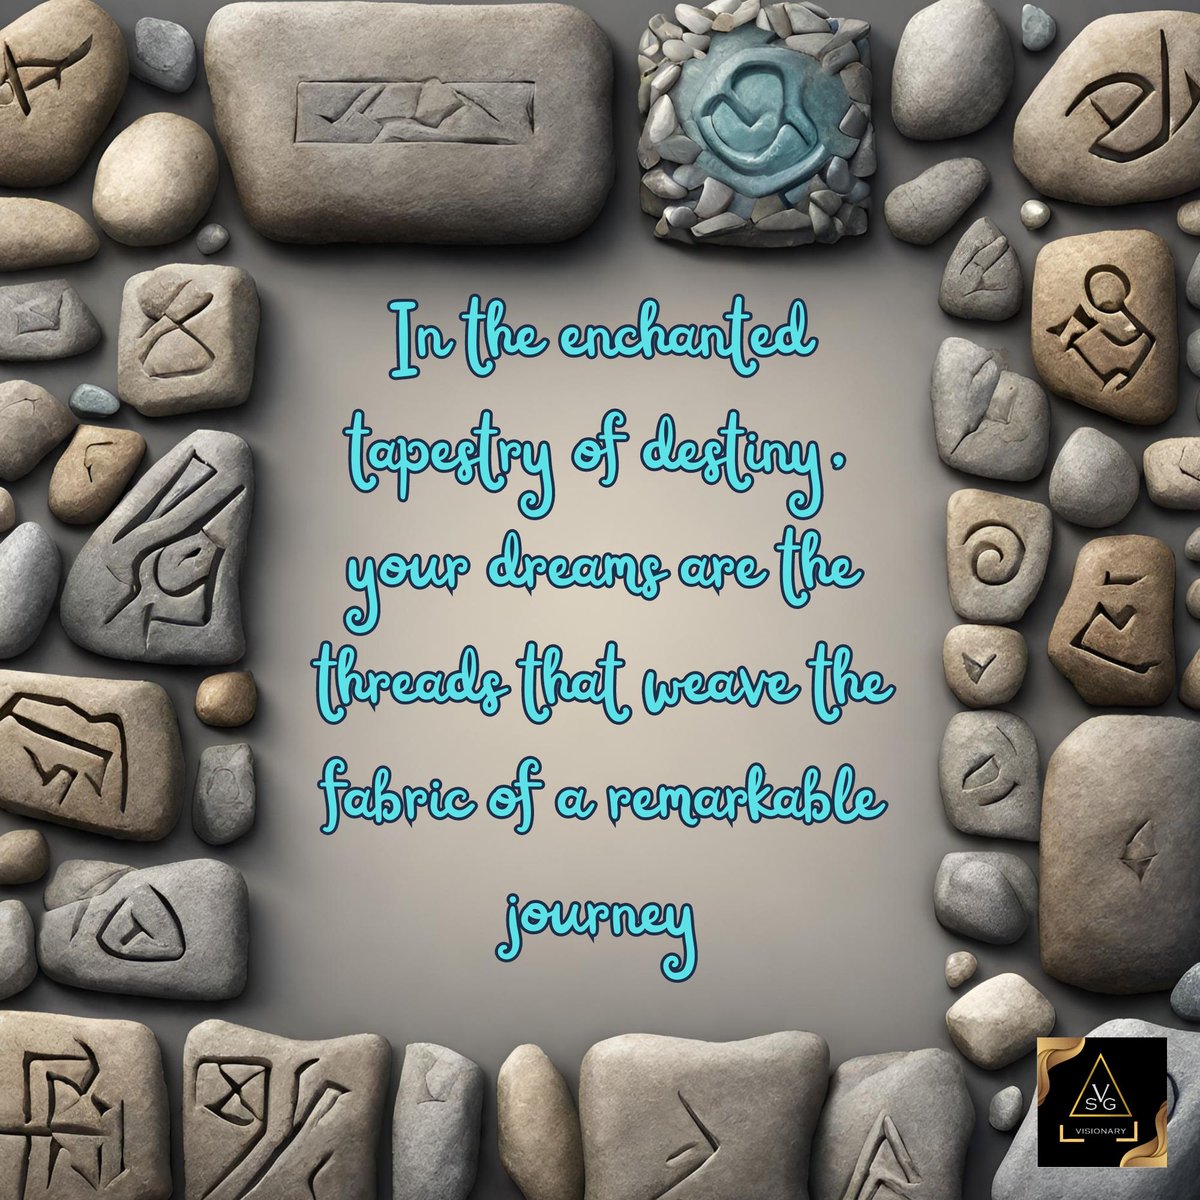 Hello, magical souls! ✨

Well wishes on your extraordinary journey.

Stay Strong,
Sasha

The path directly to SGV Pigeon Post:
mailchi.mp/da07c0b74150/s…

#inspirationalquotes #motivation #motivationalquotes #magic #runes #dailyinspiration  #fantasy #fantasyquotes #StayStrong #love